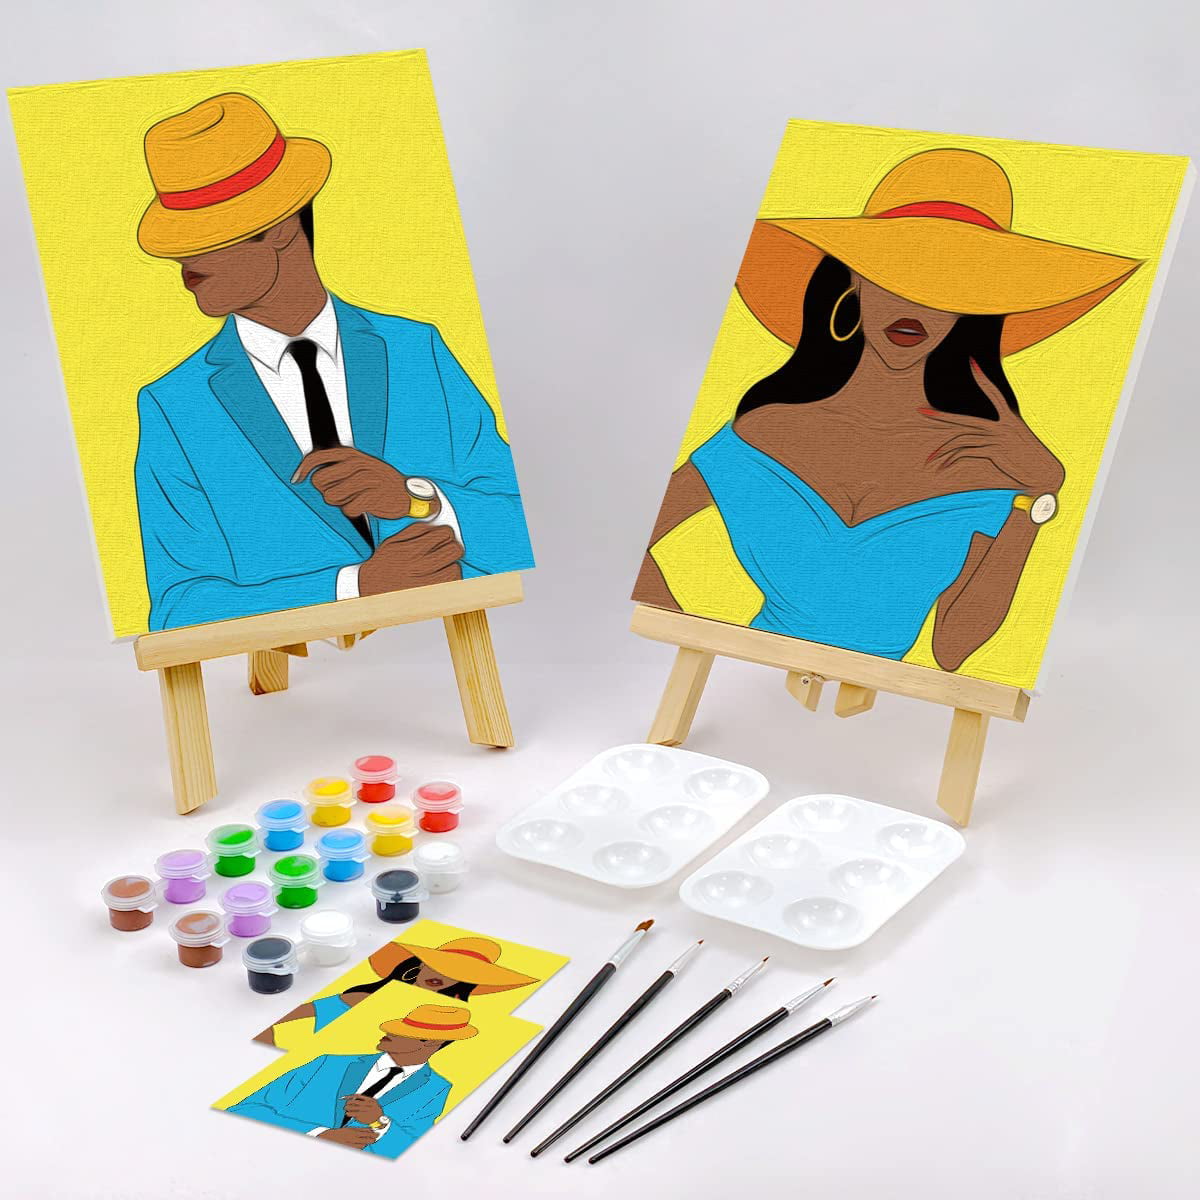 VOCHIC Couples Paint Party Kits Pre Drawn Canvas for Adults for Paint and Sip Date Night Games for Couples Painting Kit 8x10 Elegant Ladies Gentlemen